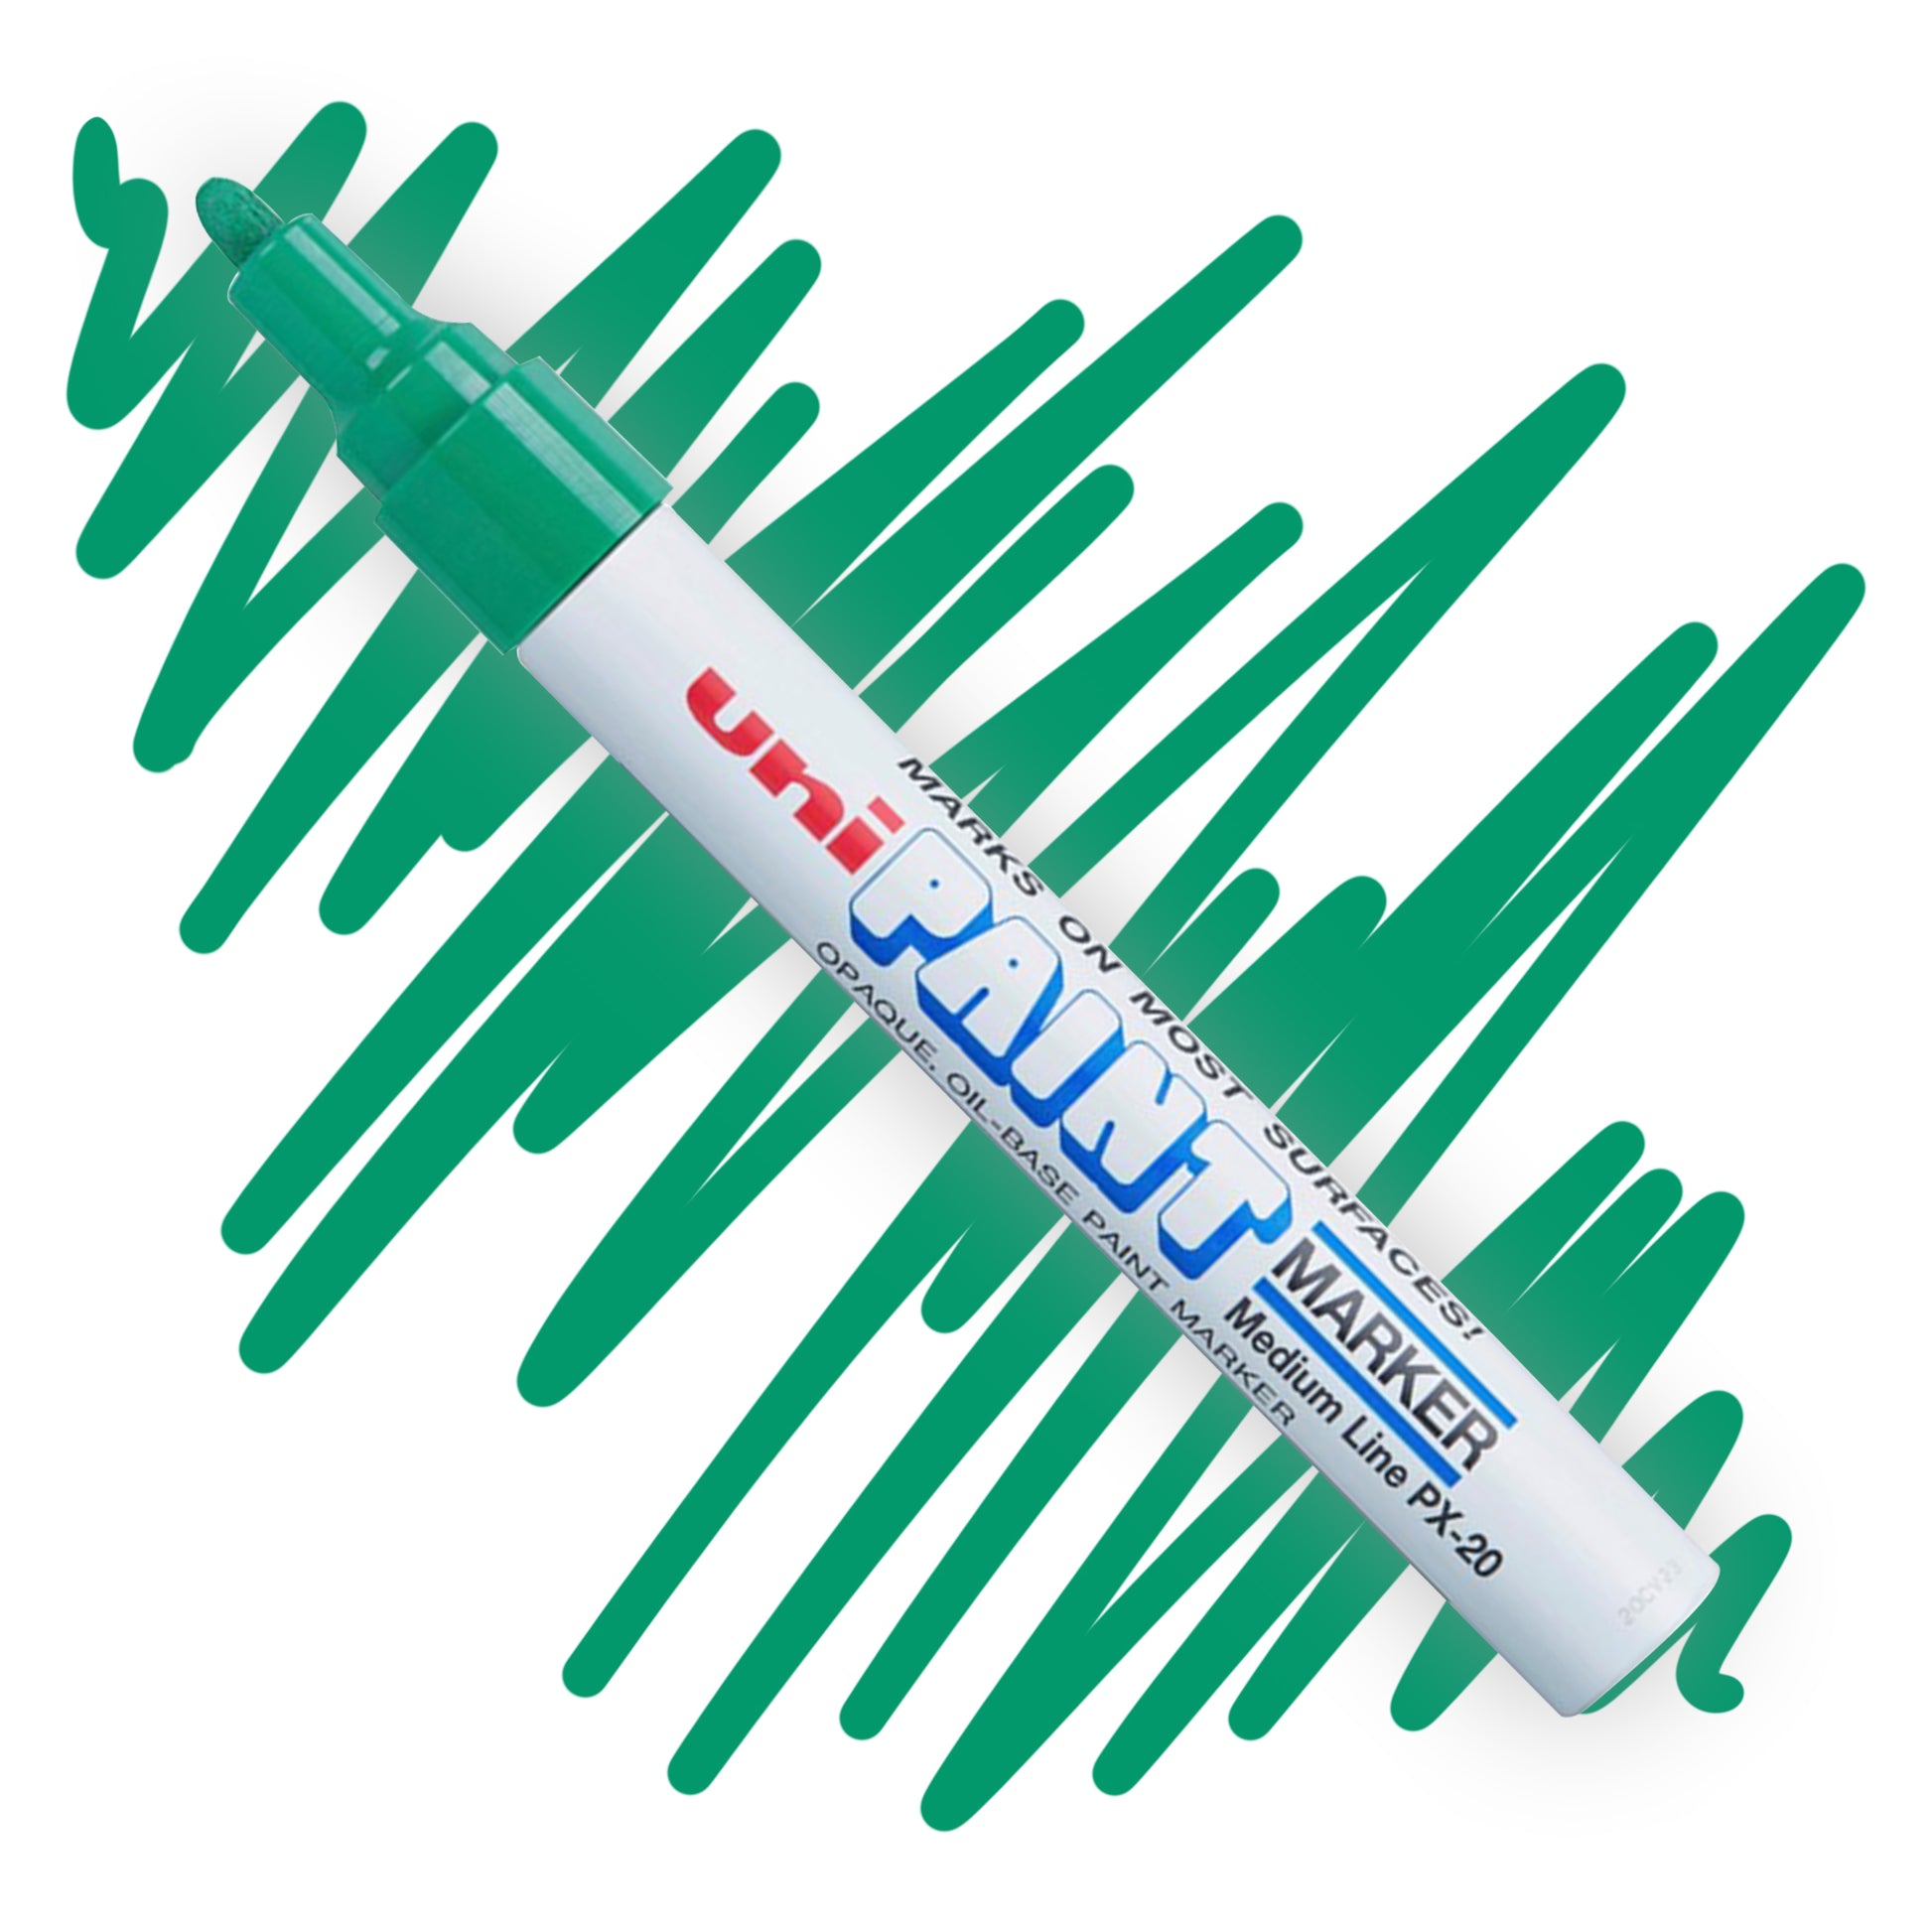 A white marker angled diagonally, the tip of the marker and the nib are colored green. On the marker body the label reads "Uni PAINT Maker". Behind the marker is a color swatch of a squiggly line in green..